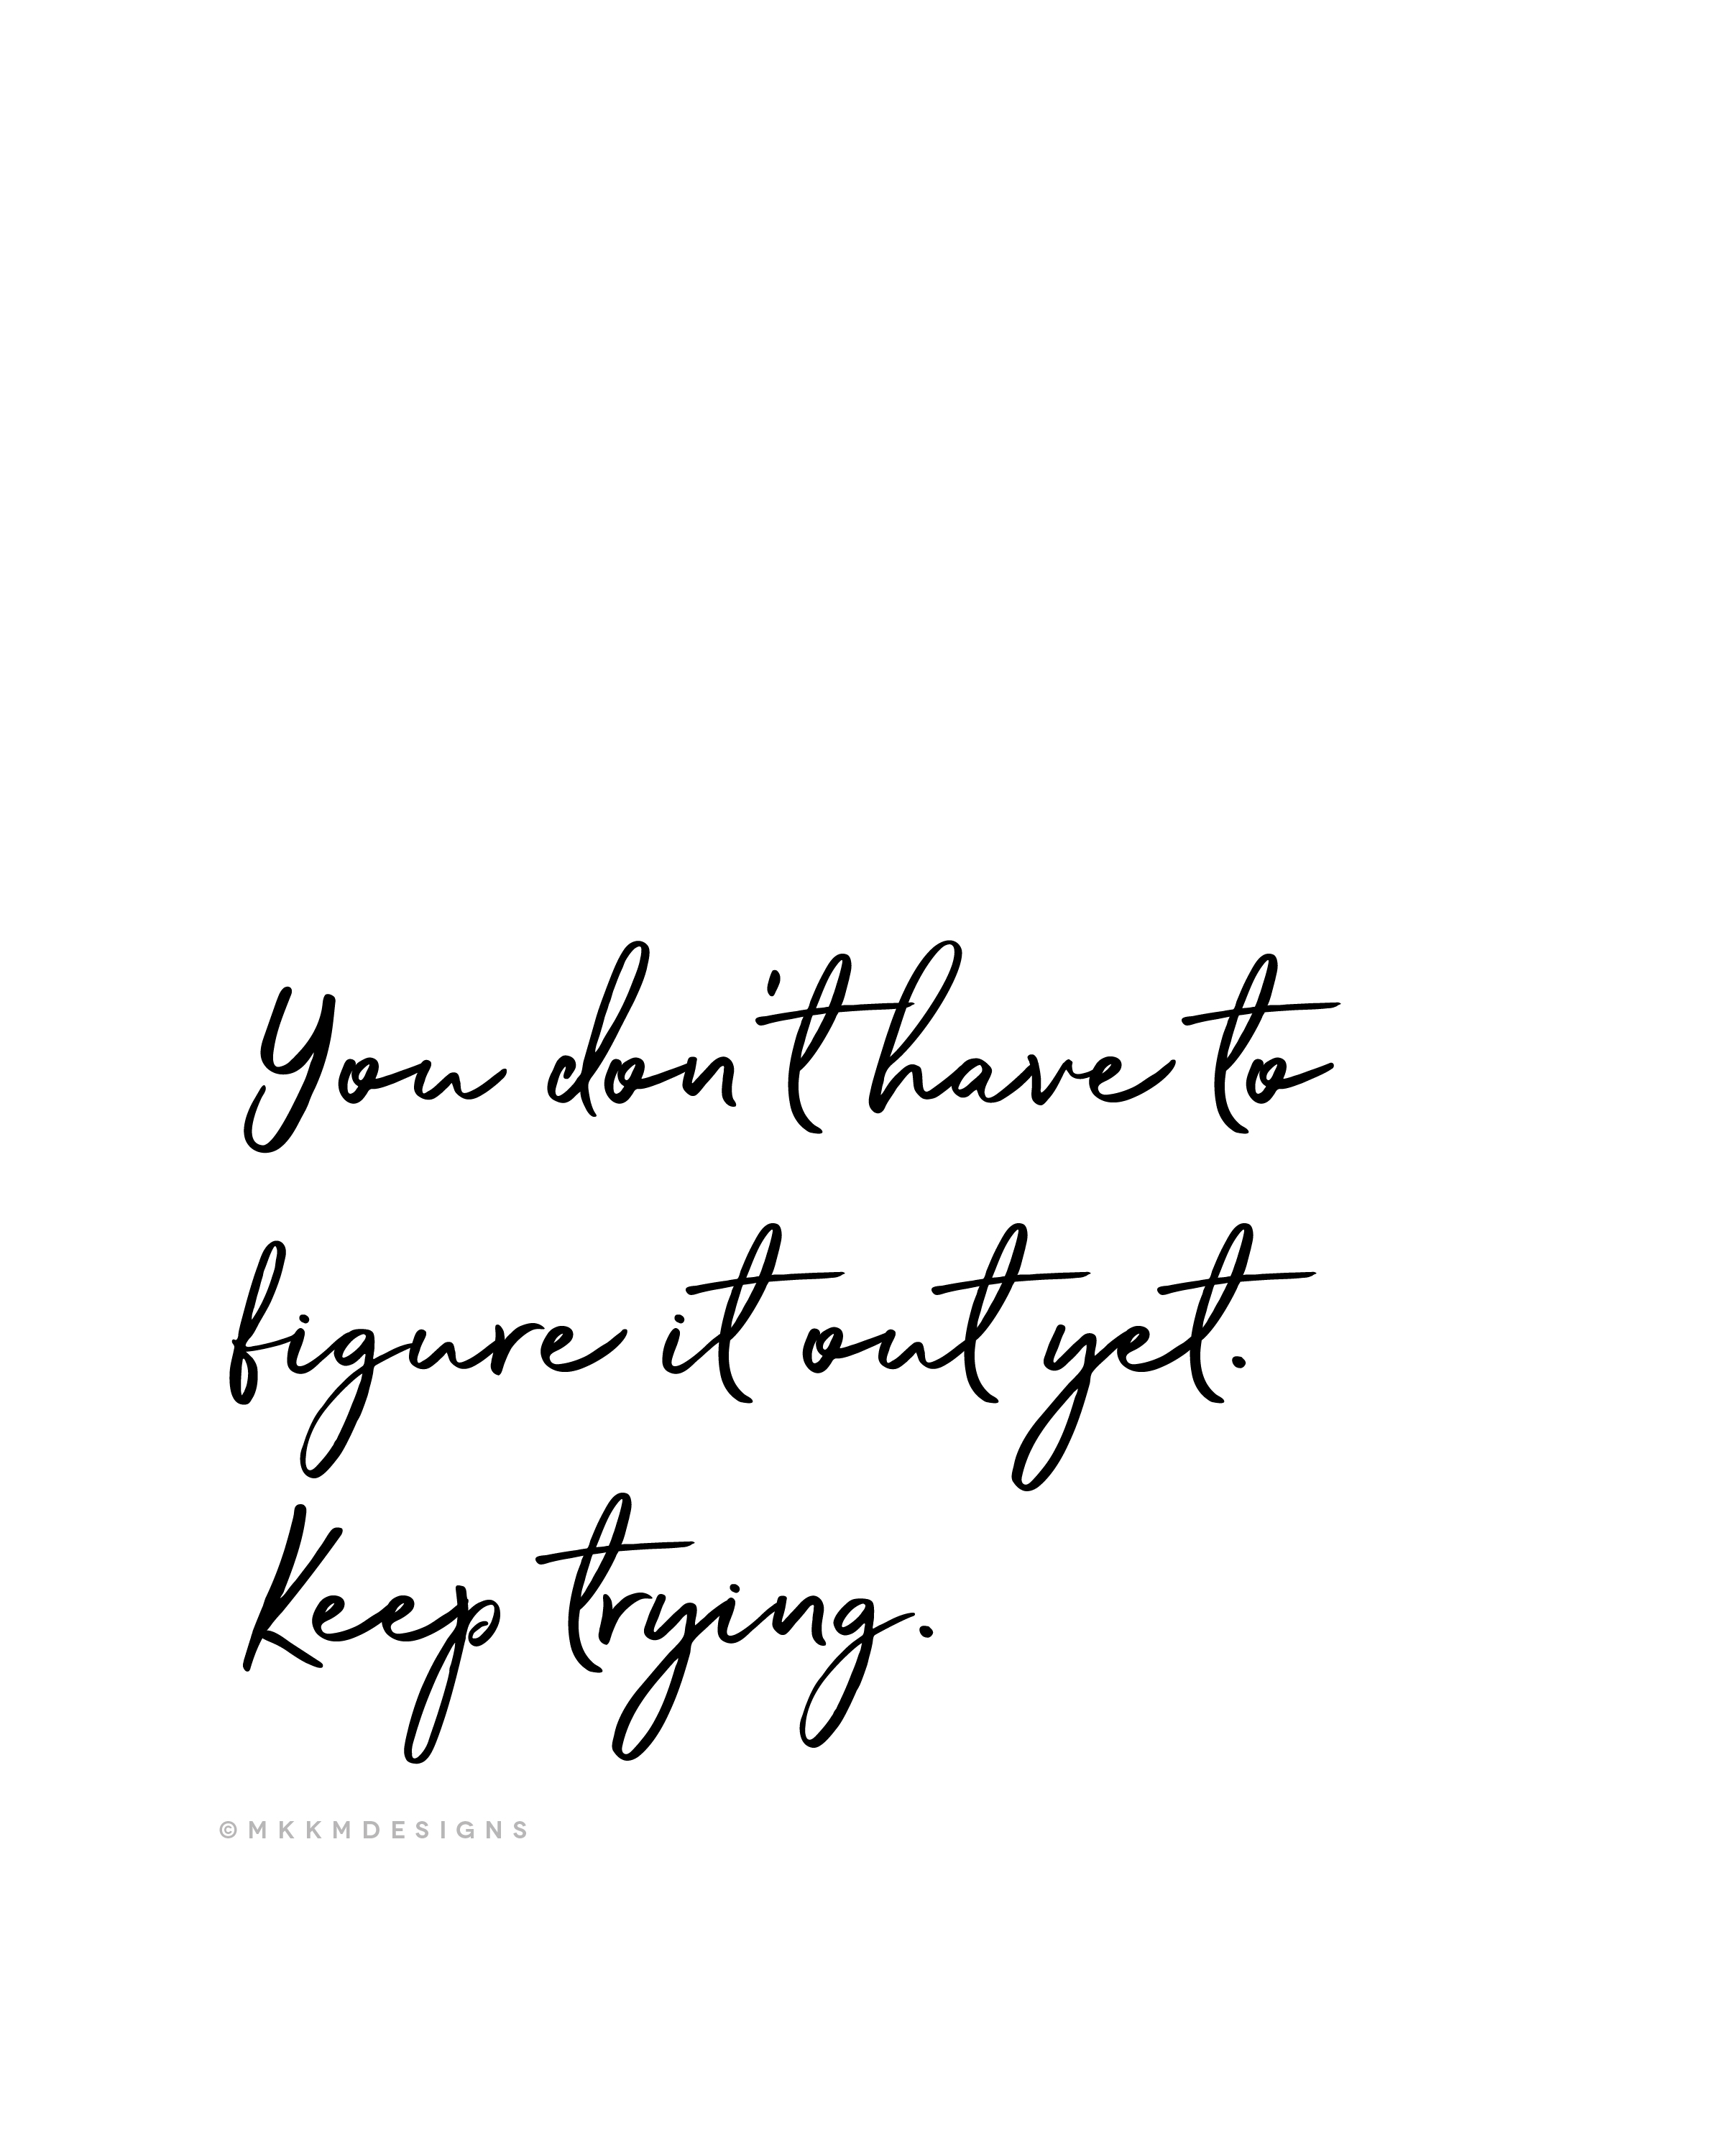 you don't have to figure it out yet. keep trying. ✦ Quote of the day ✦ monday motivation // ✦ mkkmdesigns